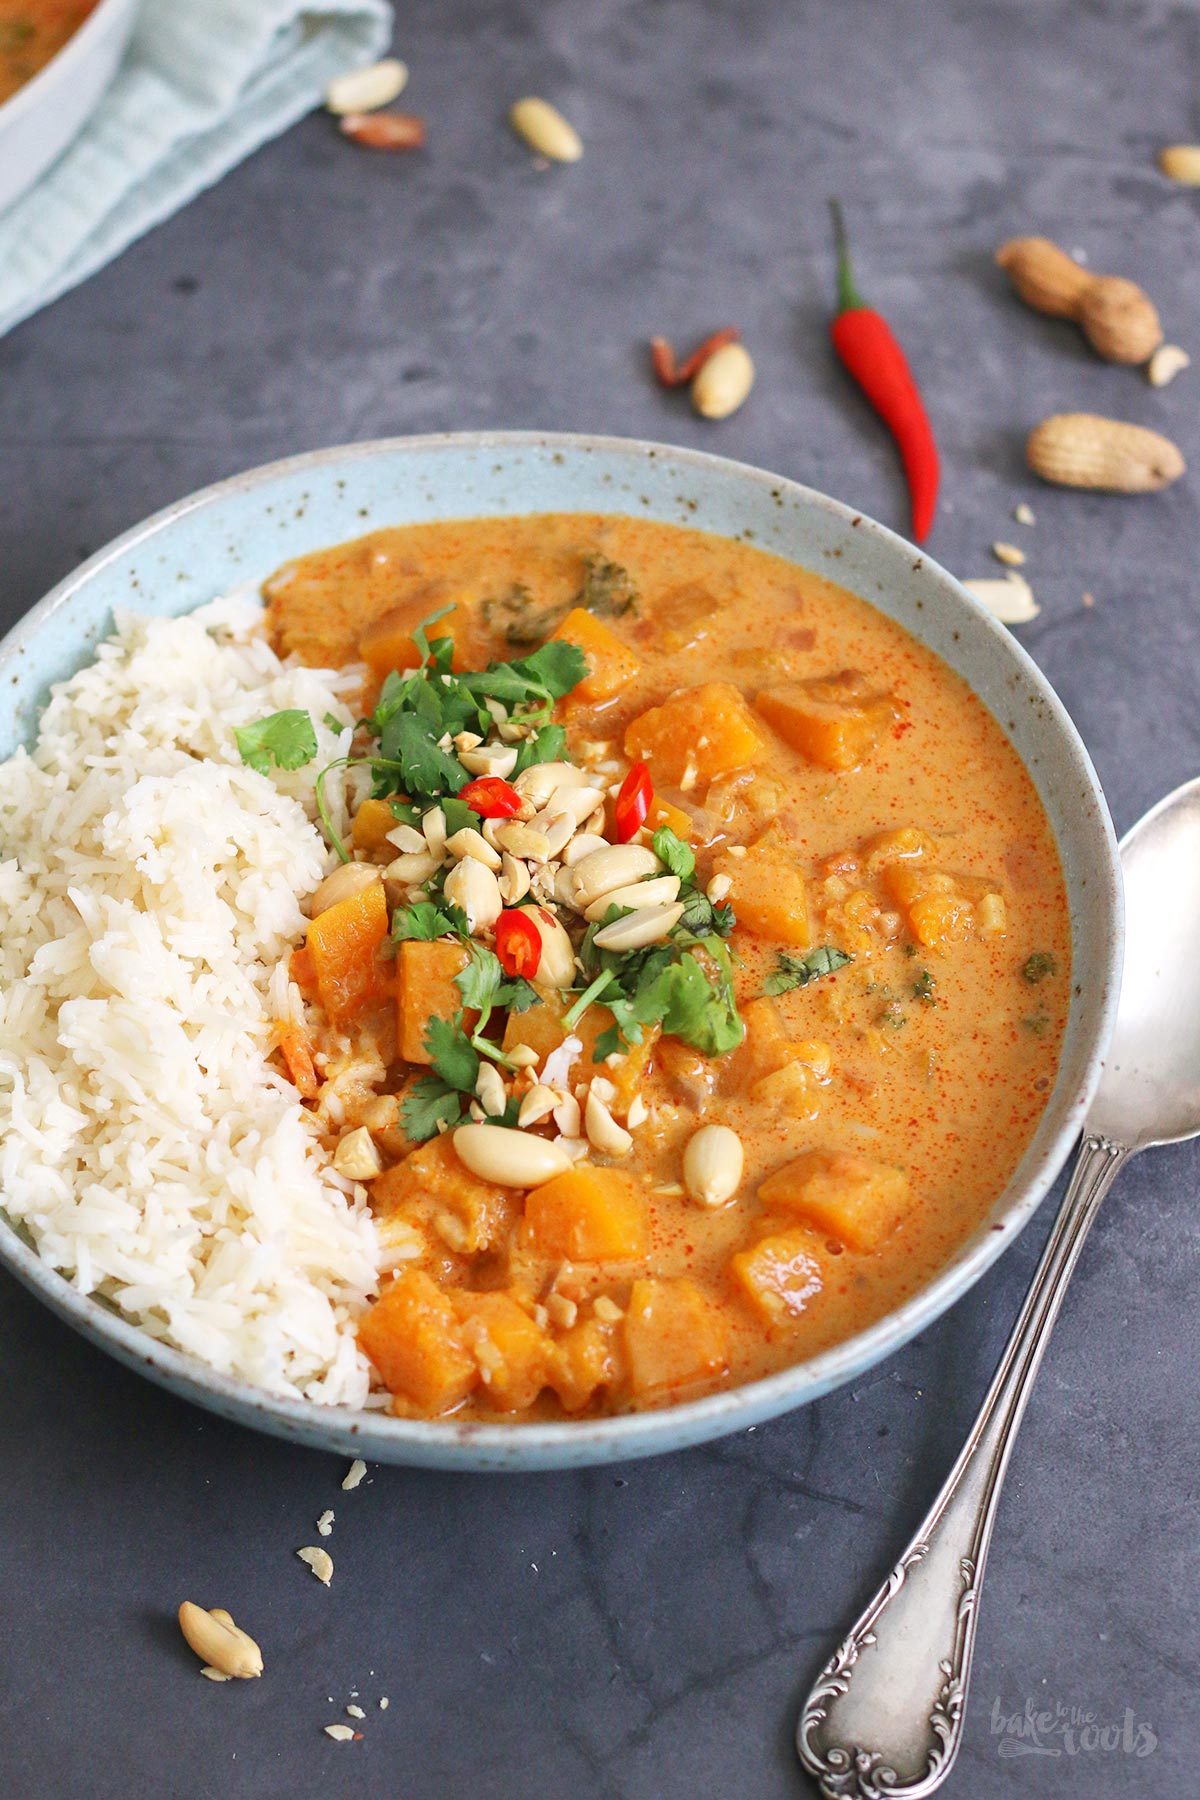 Vegan Red Thai Pumpkin Peanut Curry | Bake to the roots